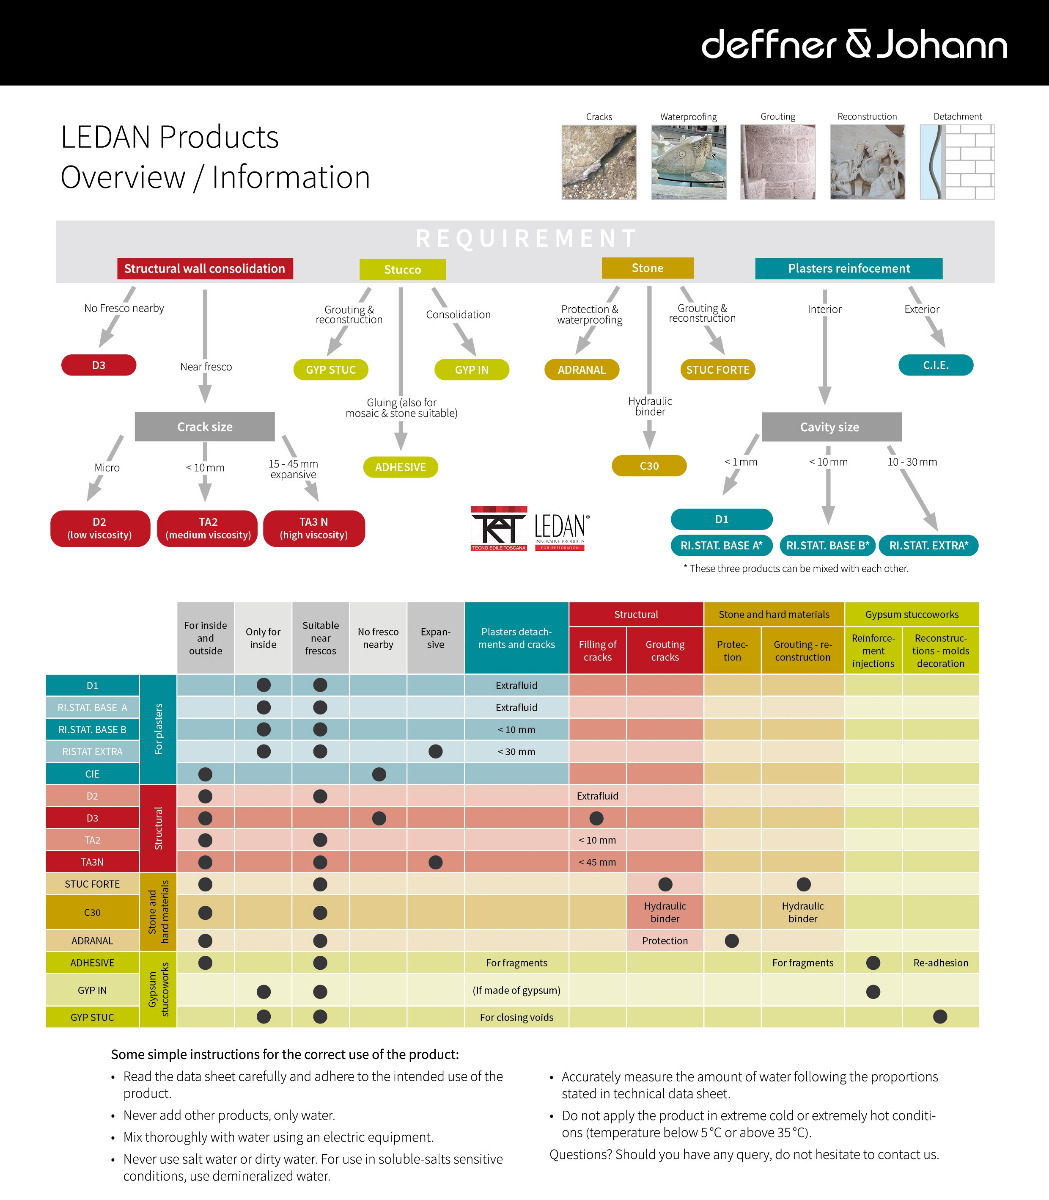 LEDAN Products - Overview and Information